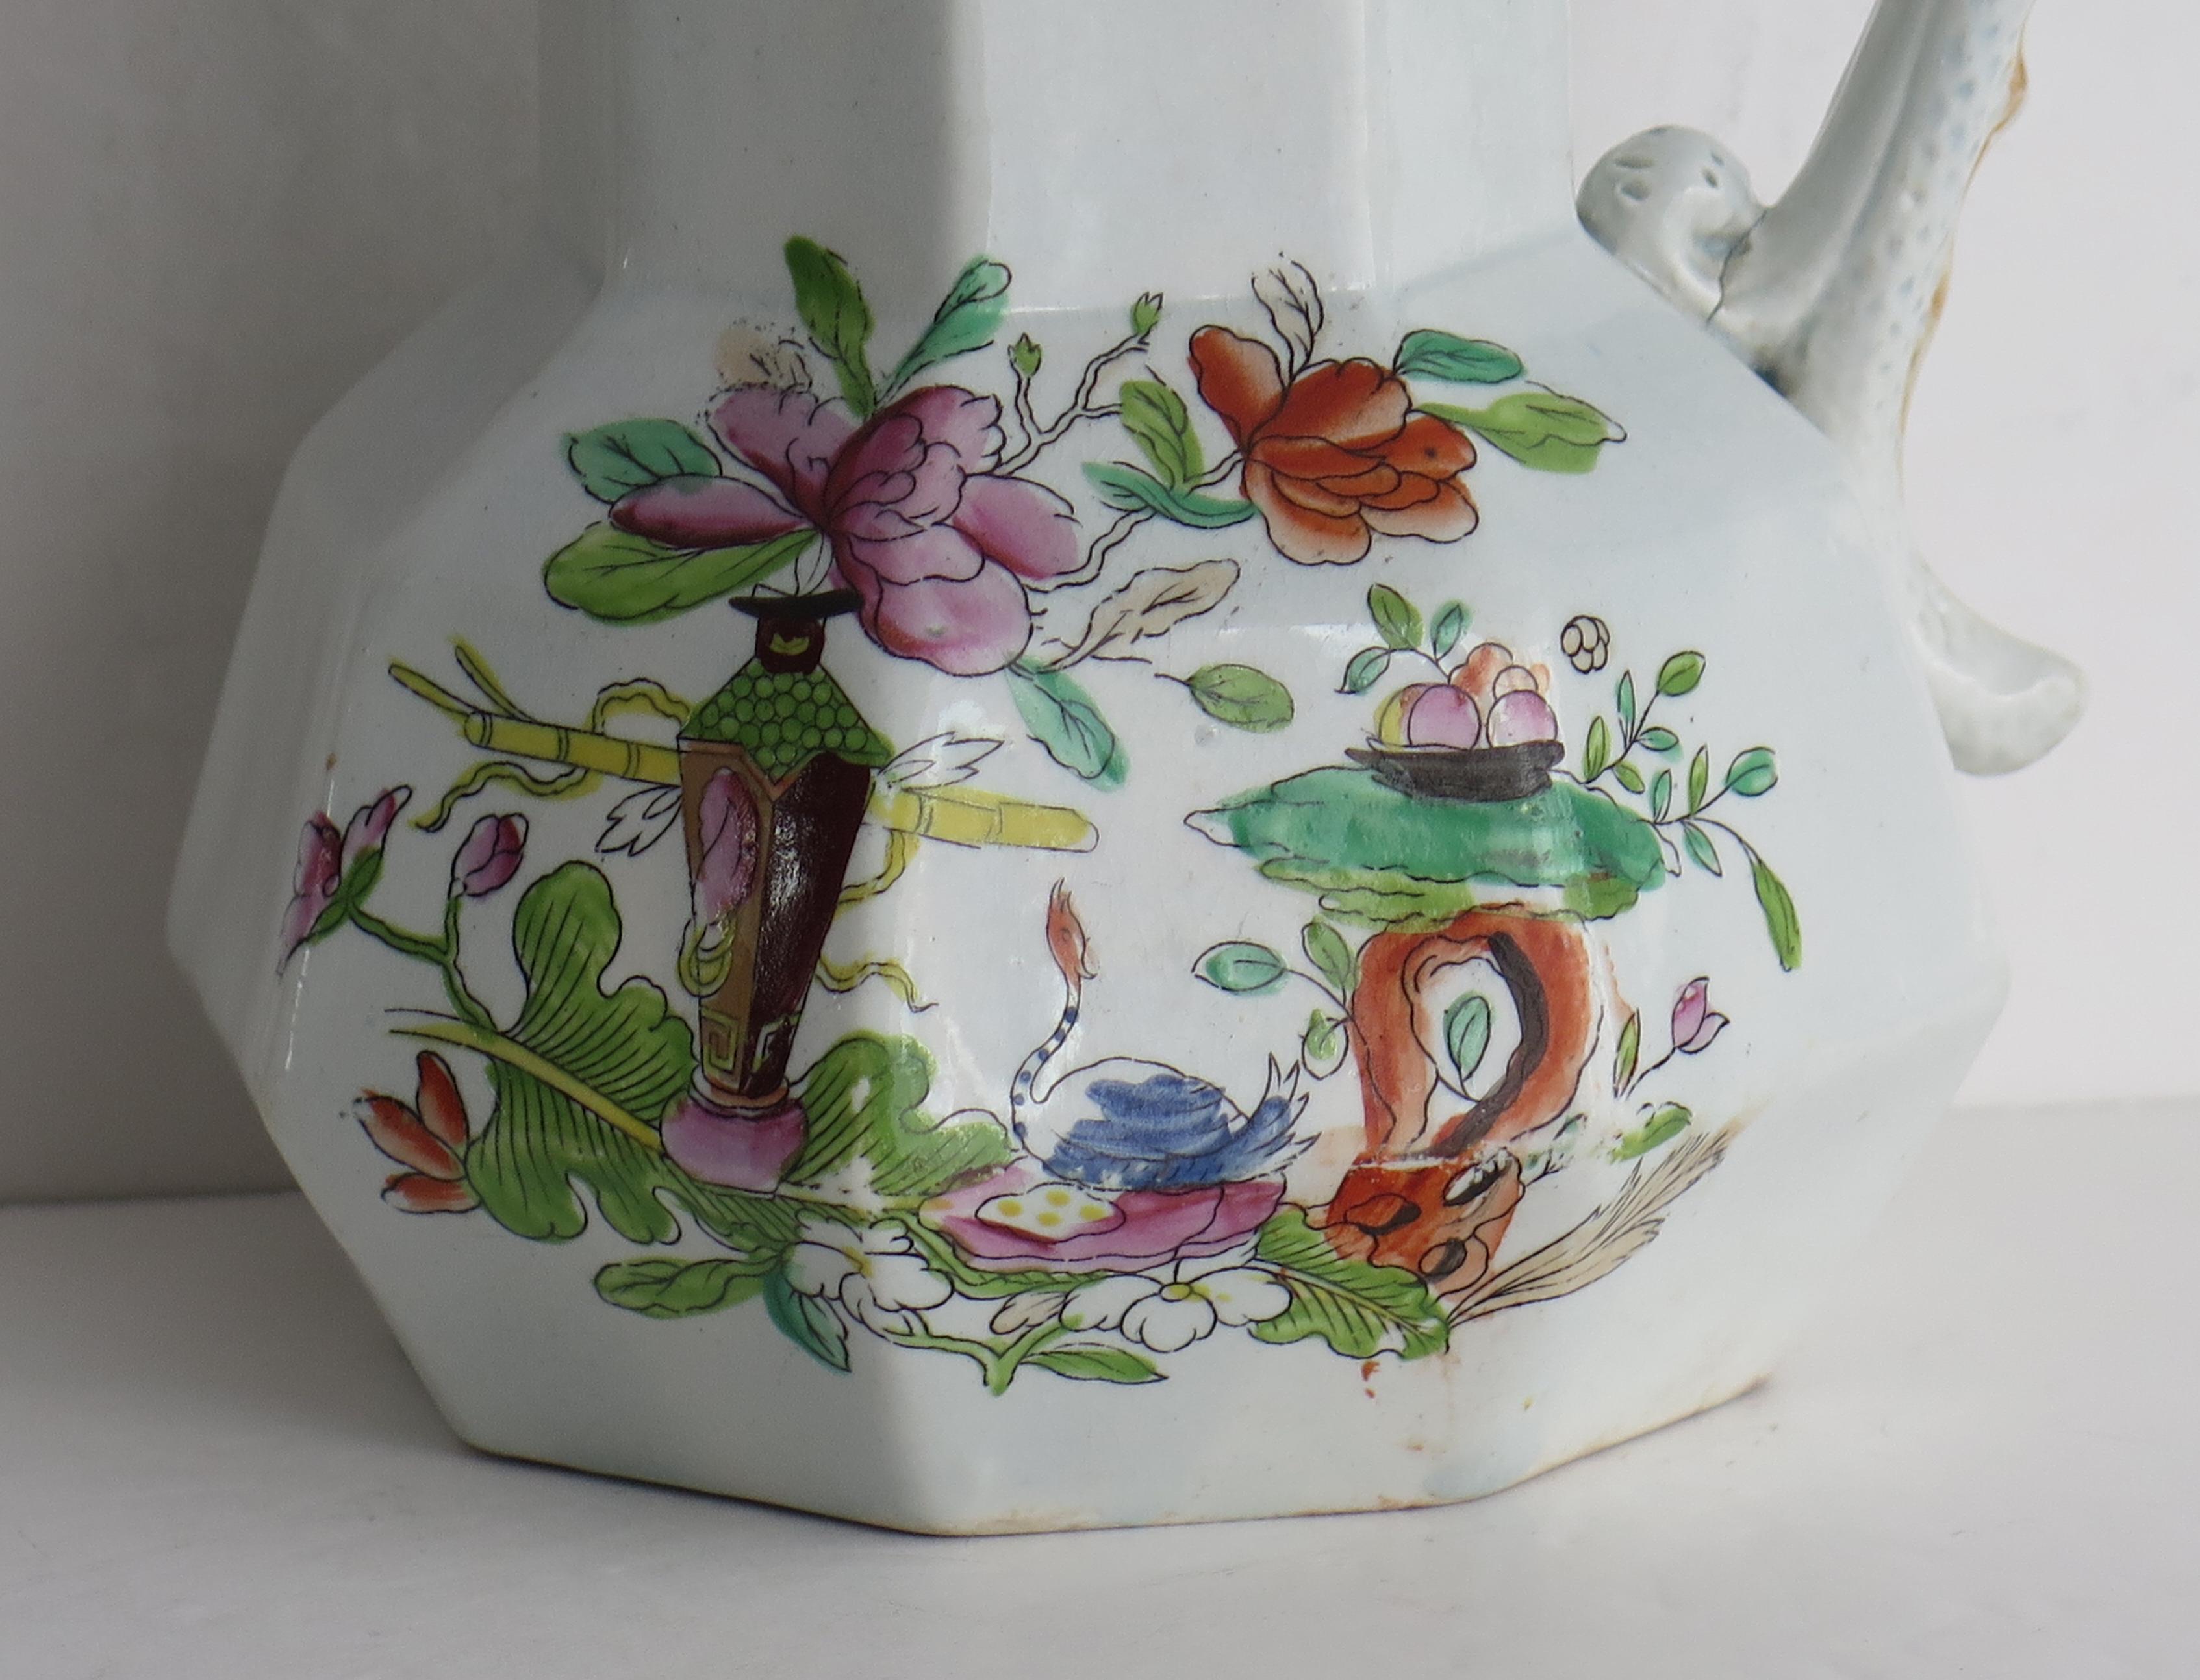 This is a hand-painted Mason's ironstone jug or pitcher, in the Table and Flower Pot gilded pattern, from their earliest George 3rd period, circa 1820. 

The jug is well potted in their octagonal 